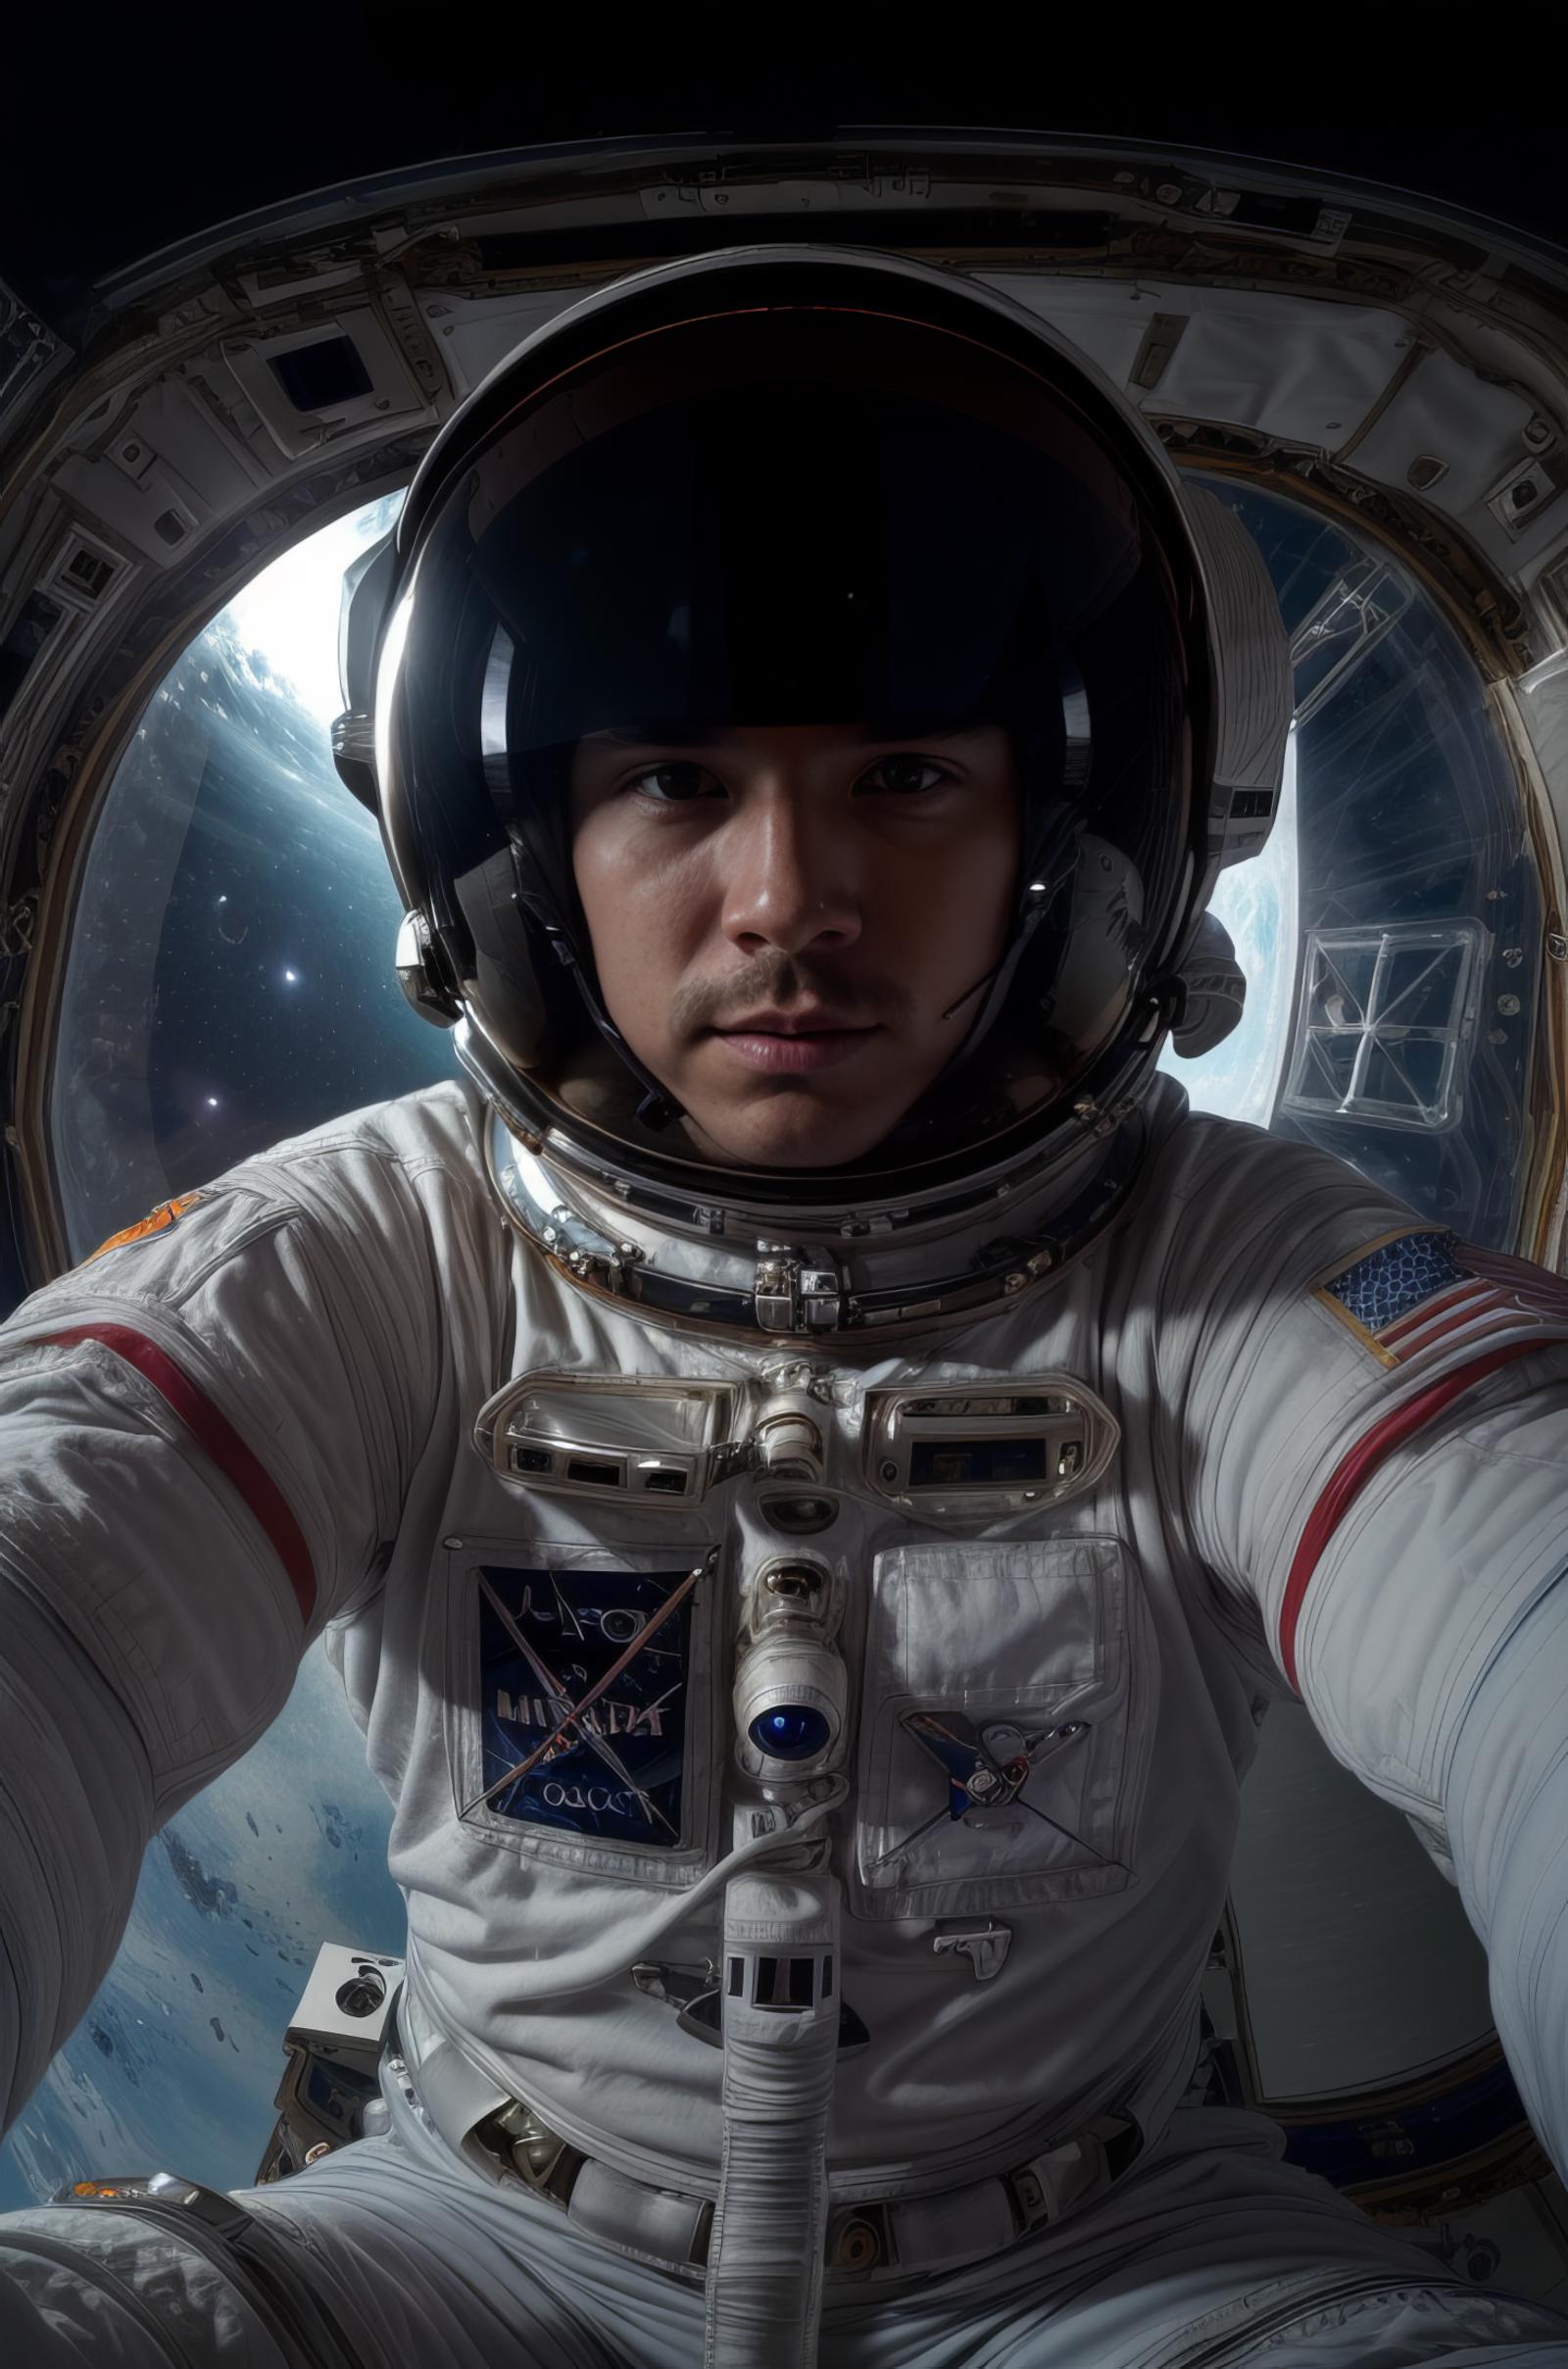 Astronaut in Space Suit Taking a Selfie in Front of a Space Window